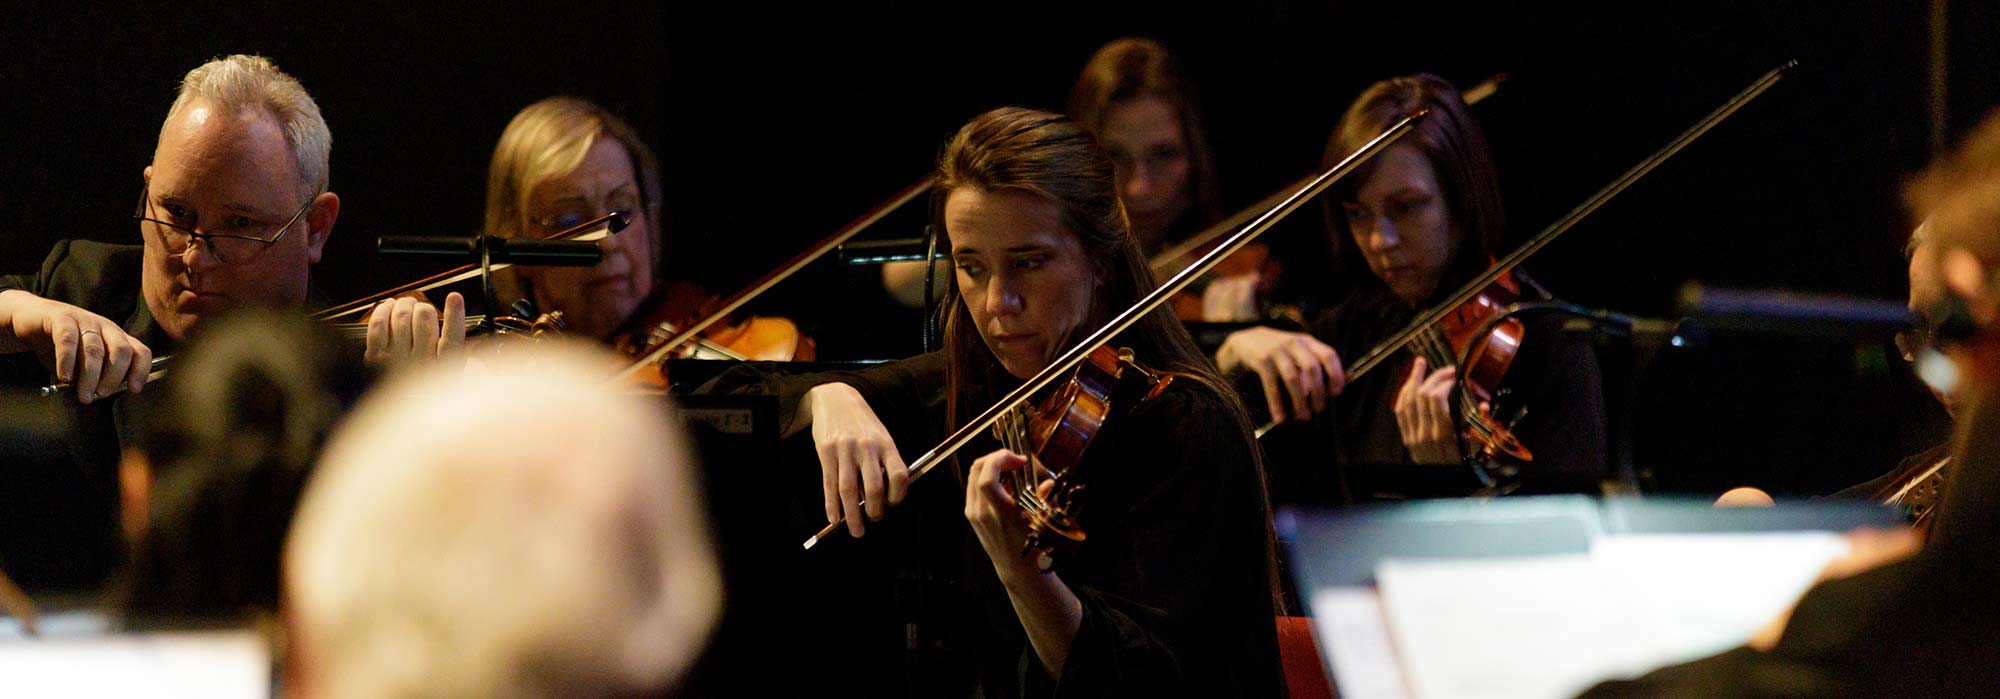 orchestra members in concert